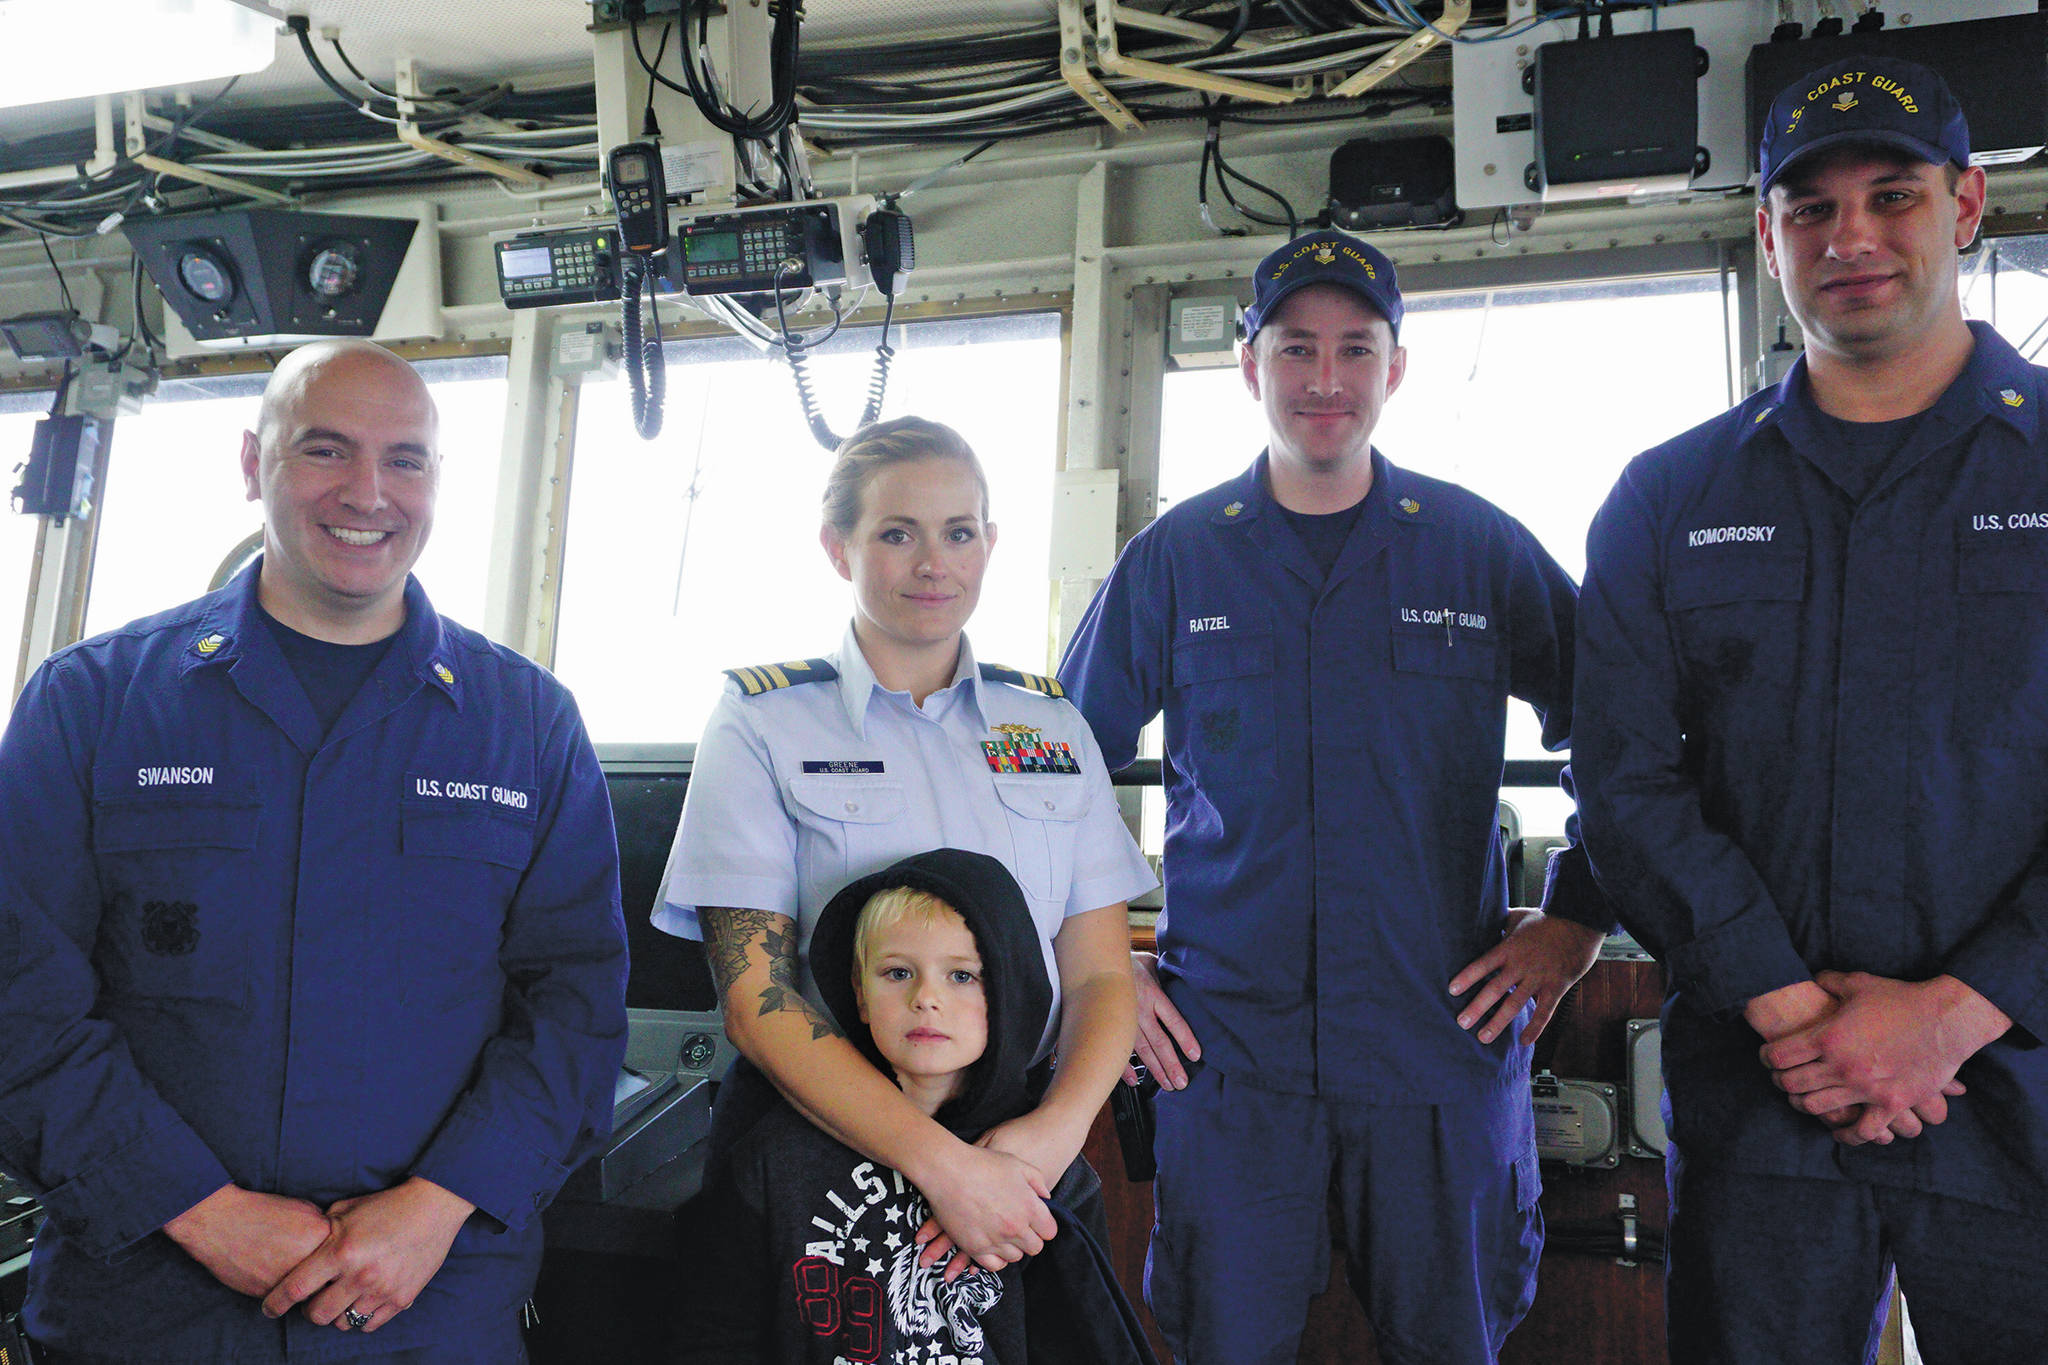 The new U.S. Coast Guard Cutter Hickory Captain, Lt. Cmdr. Jeannette M. Greene, poses with her son, Grady, and crewmates, from left to right, Petty Officer 1st Class Jon Swanson, Petty Officer 1st Class Dermont Ratzel, and Petty Officer 2nd Class Carl Komorosky, after Greene’s assumption of command ceremony on Friday, Oct. 4, 2019, at the Pioneer Dock, in Homer, Alaska. (Photo by Michael Armstrong/Homer News)